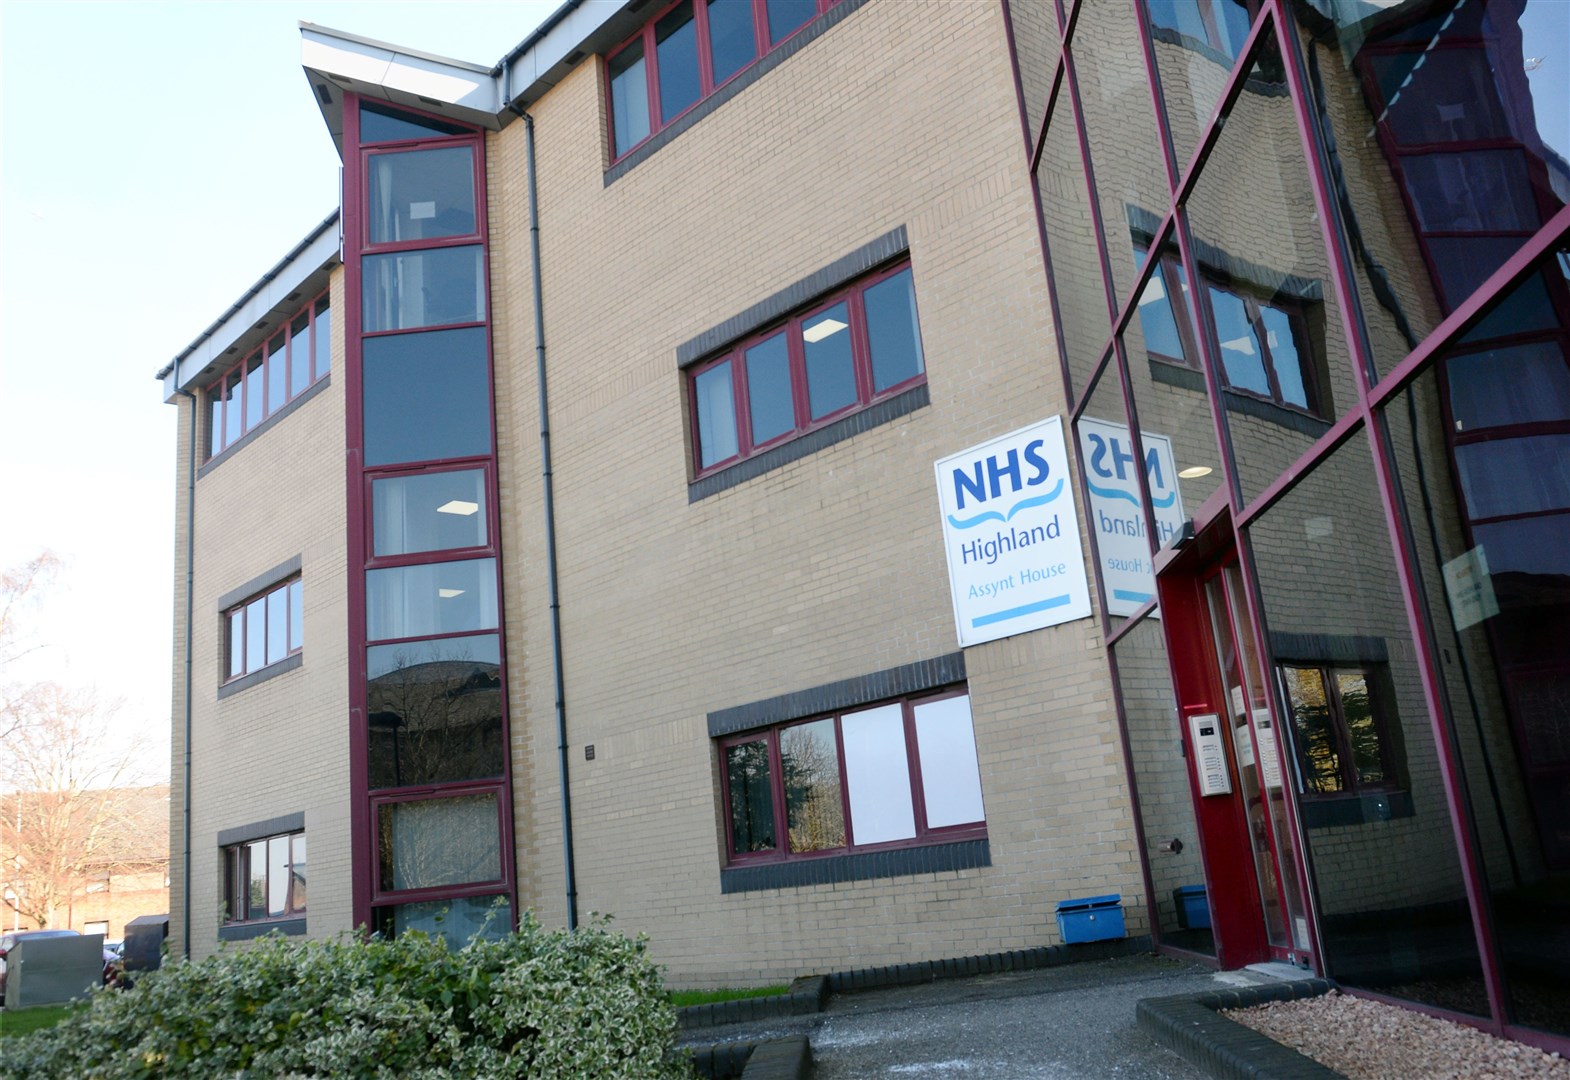 NHS Highland said it fully accepted the recommendations in the report from the Scottish Public Services Ombudsman.